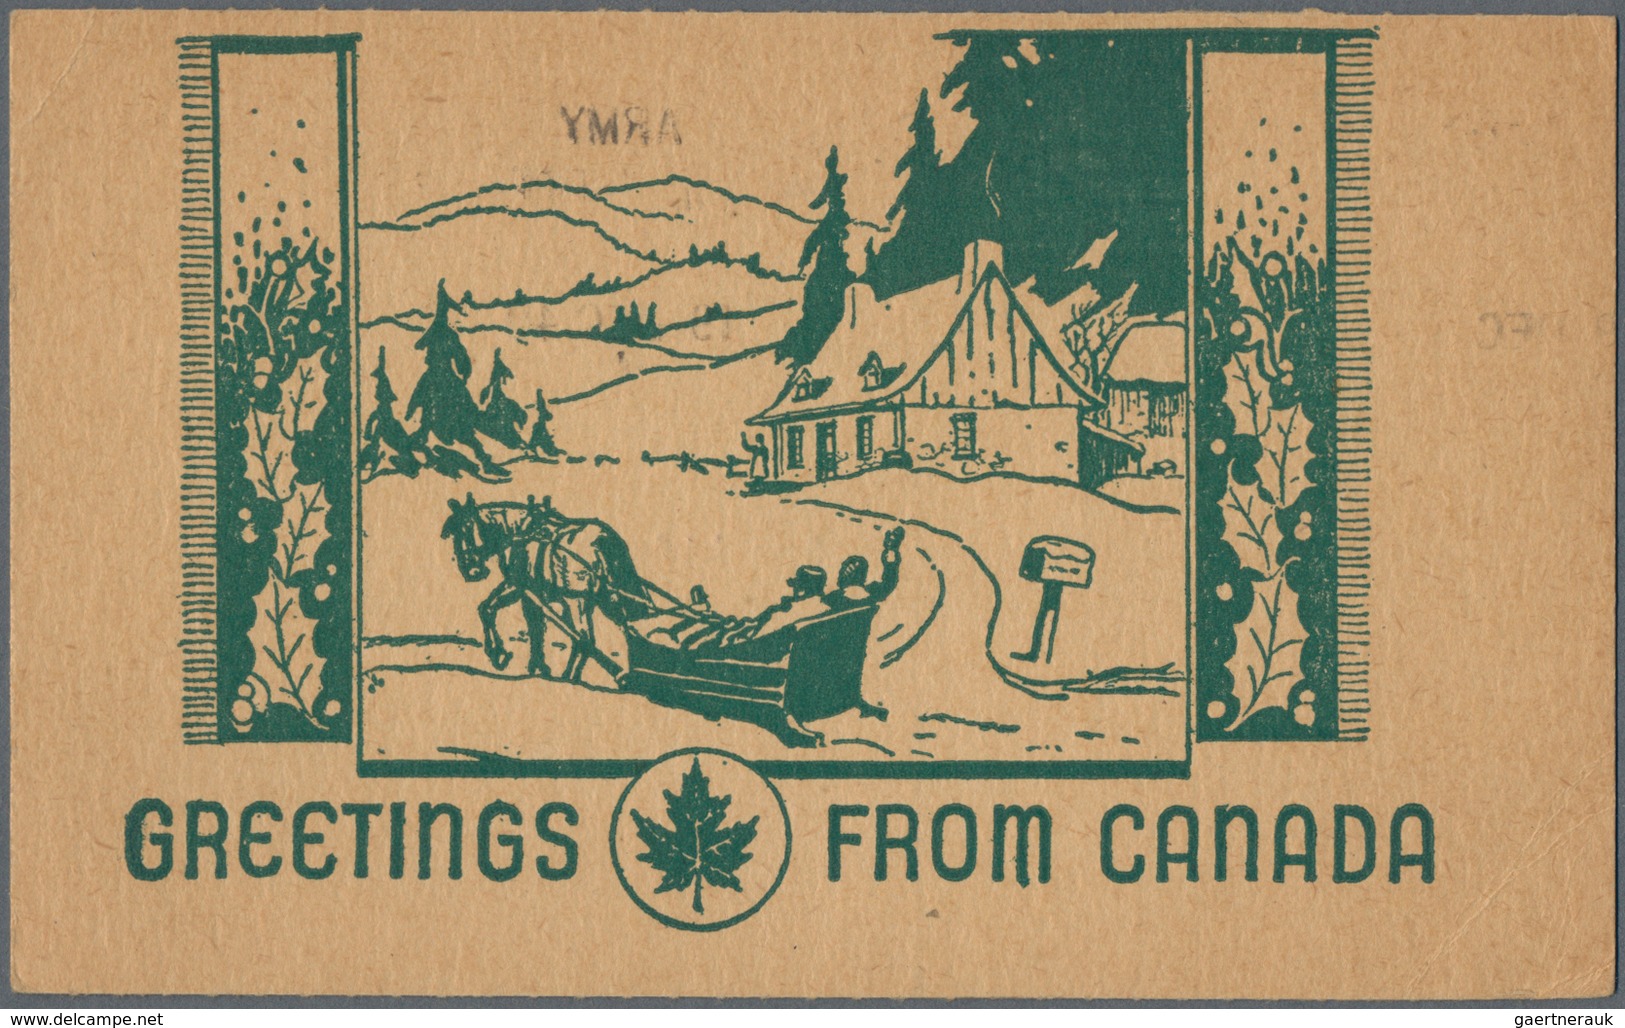 Kanada: 1941/45 holding of 450 cards, letters and postal stationeries, field post, maritime mail, ce